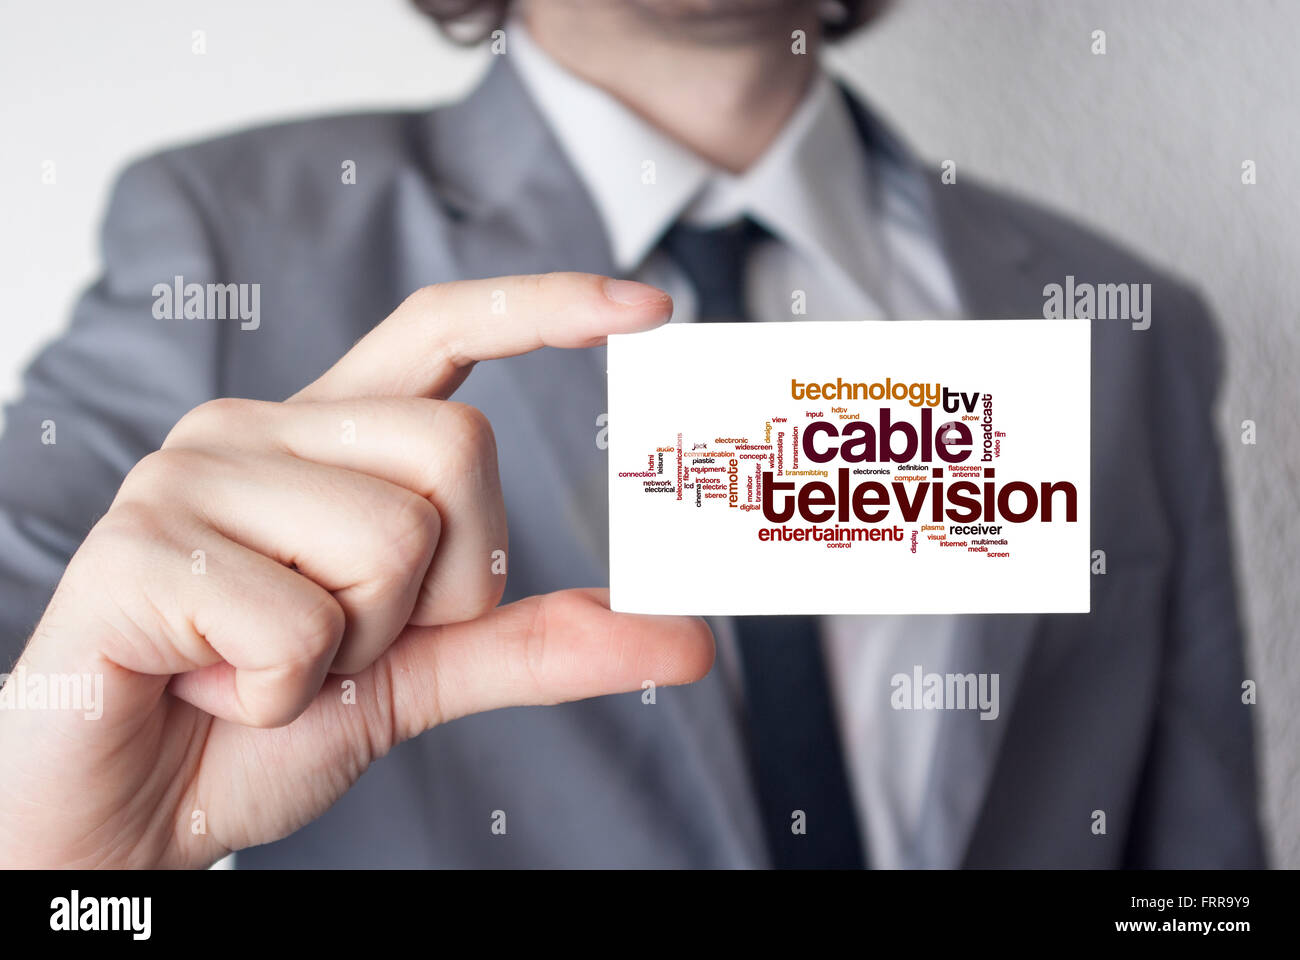 Cable television. Businessman in suit with a black tie showing or holding business card Stock Photo